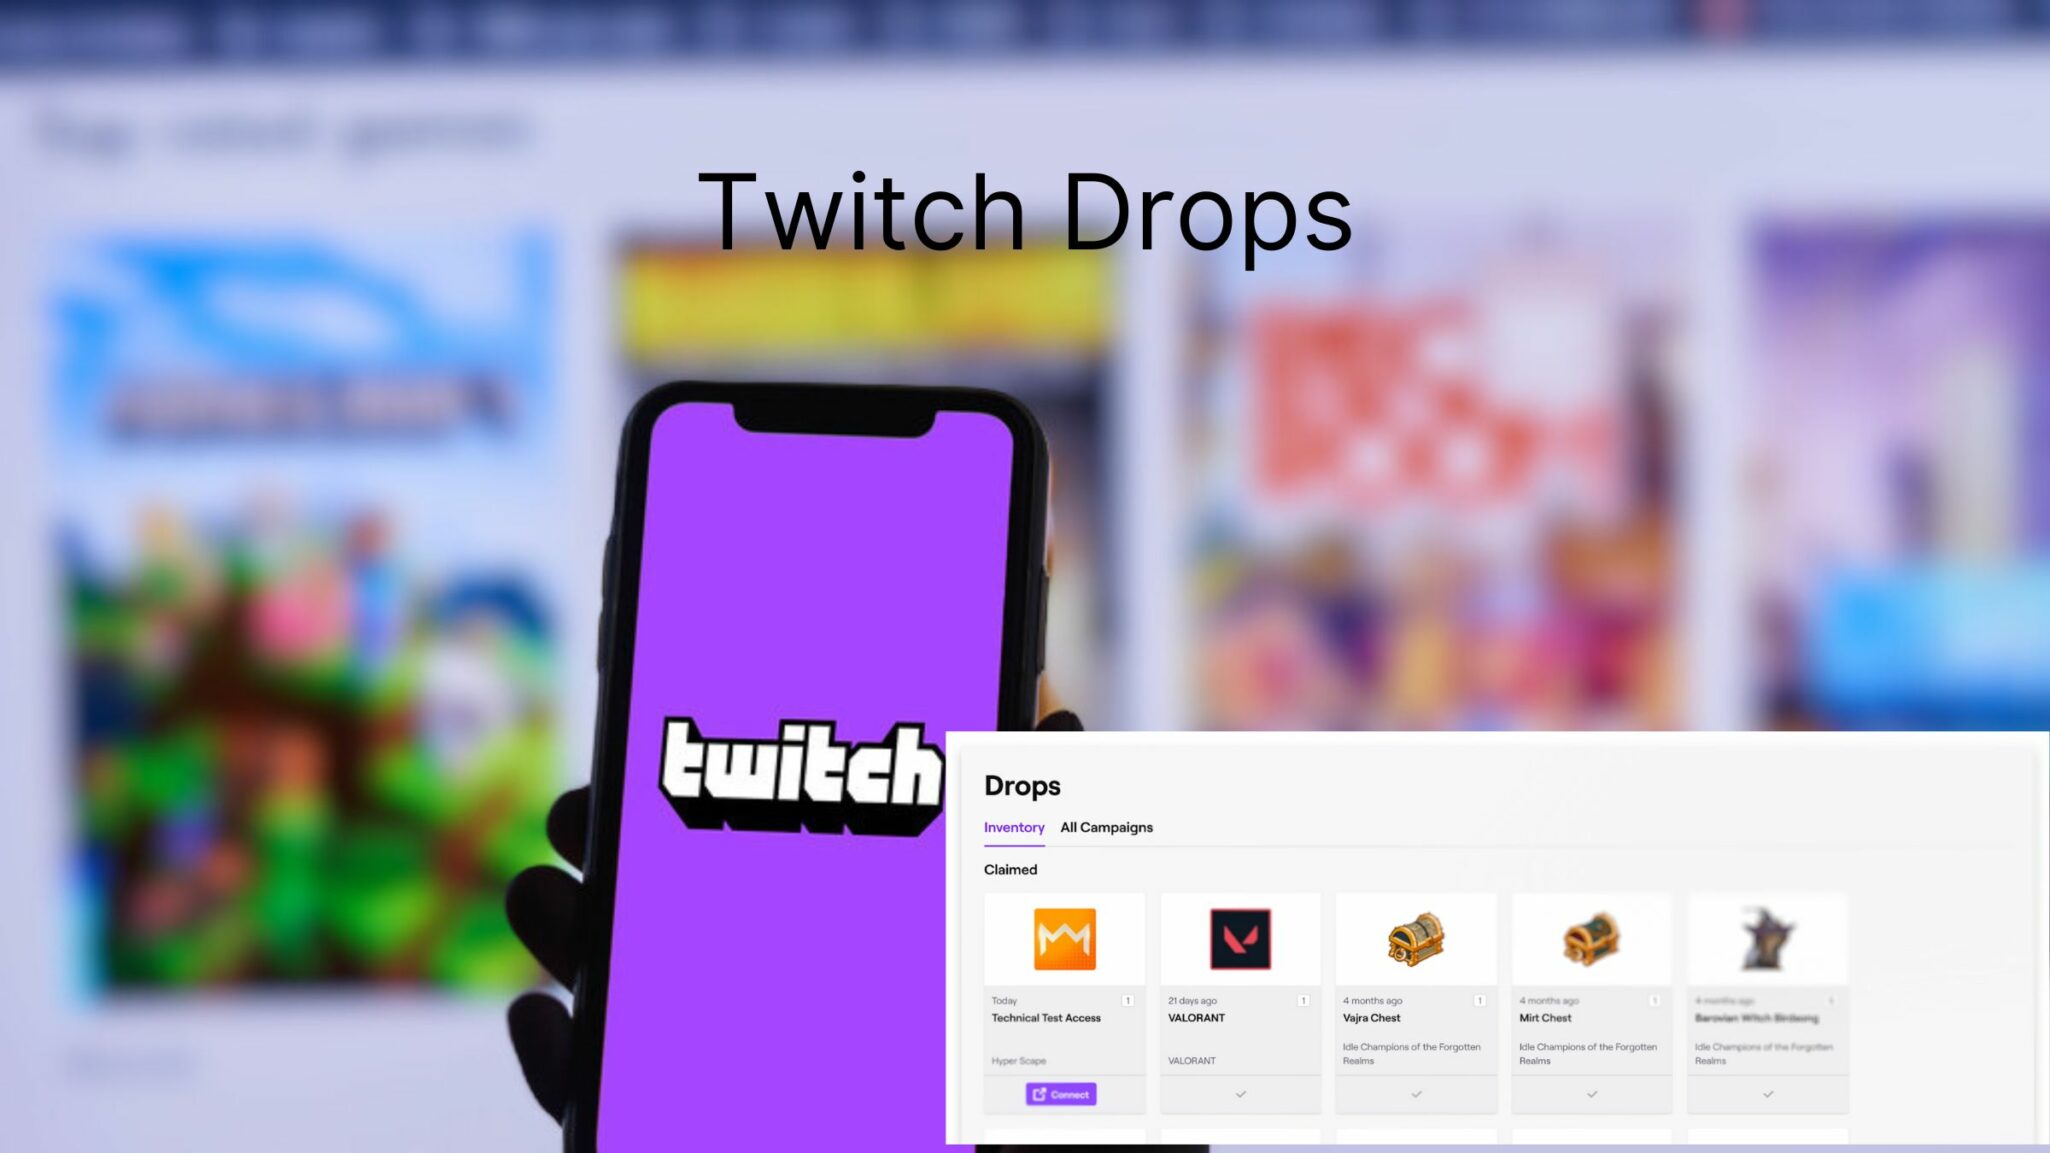 How to Check Twitch Drops Inventory and Progress